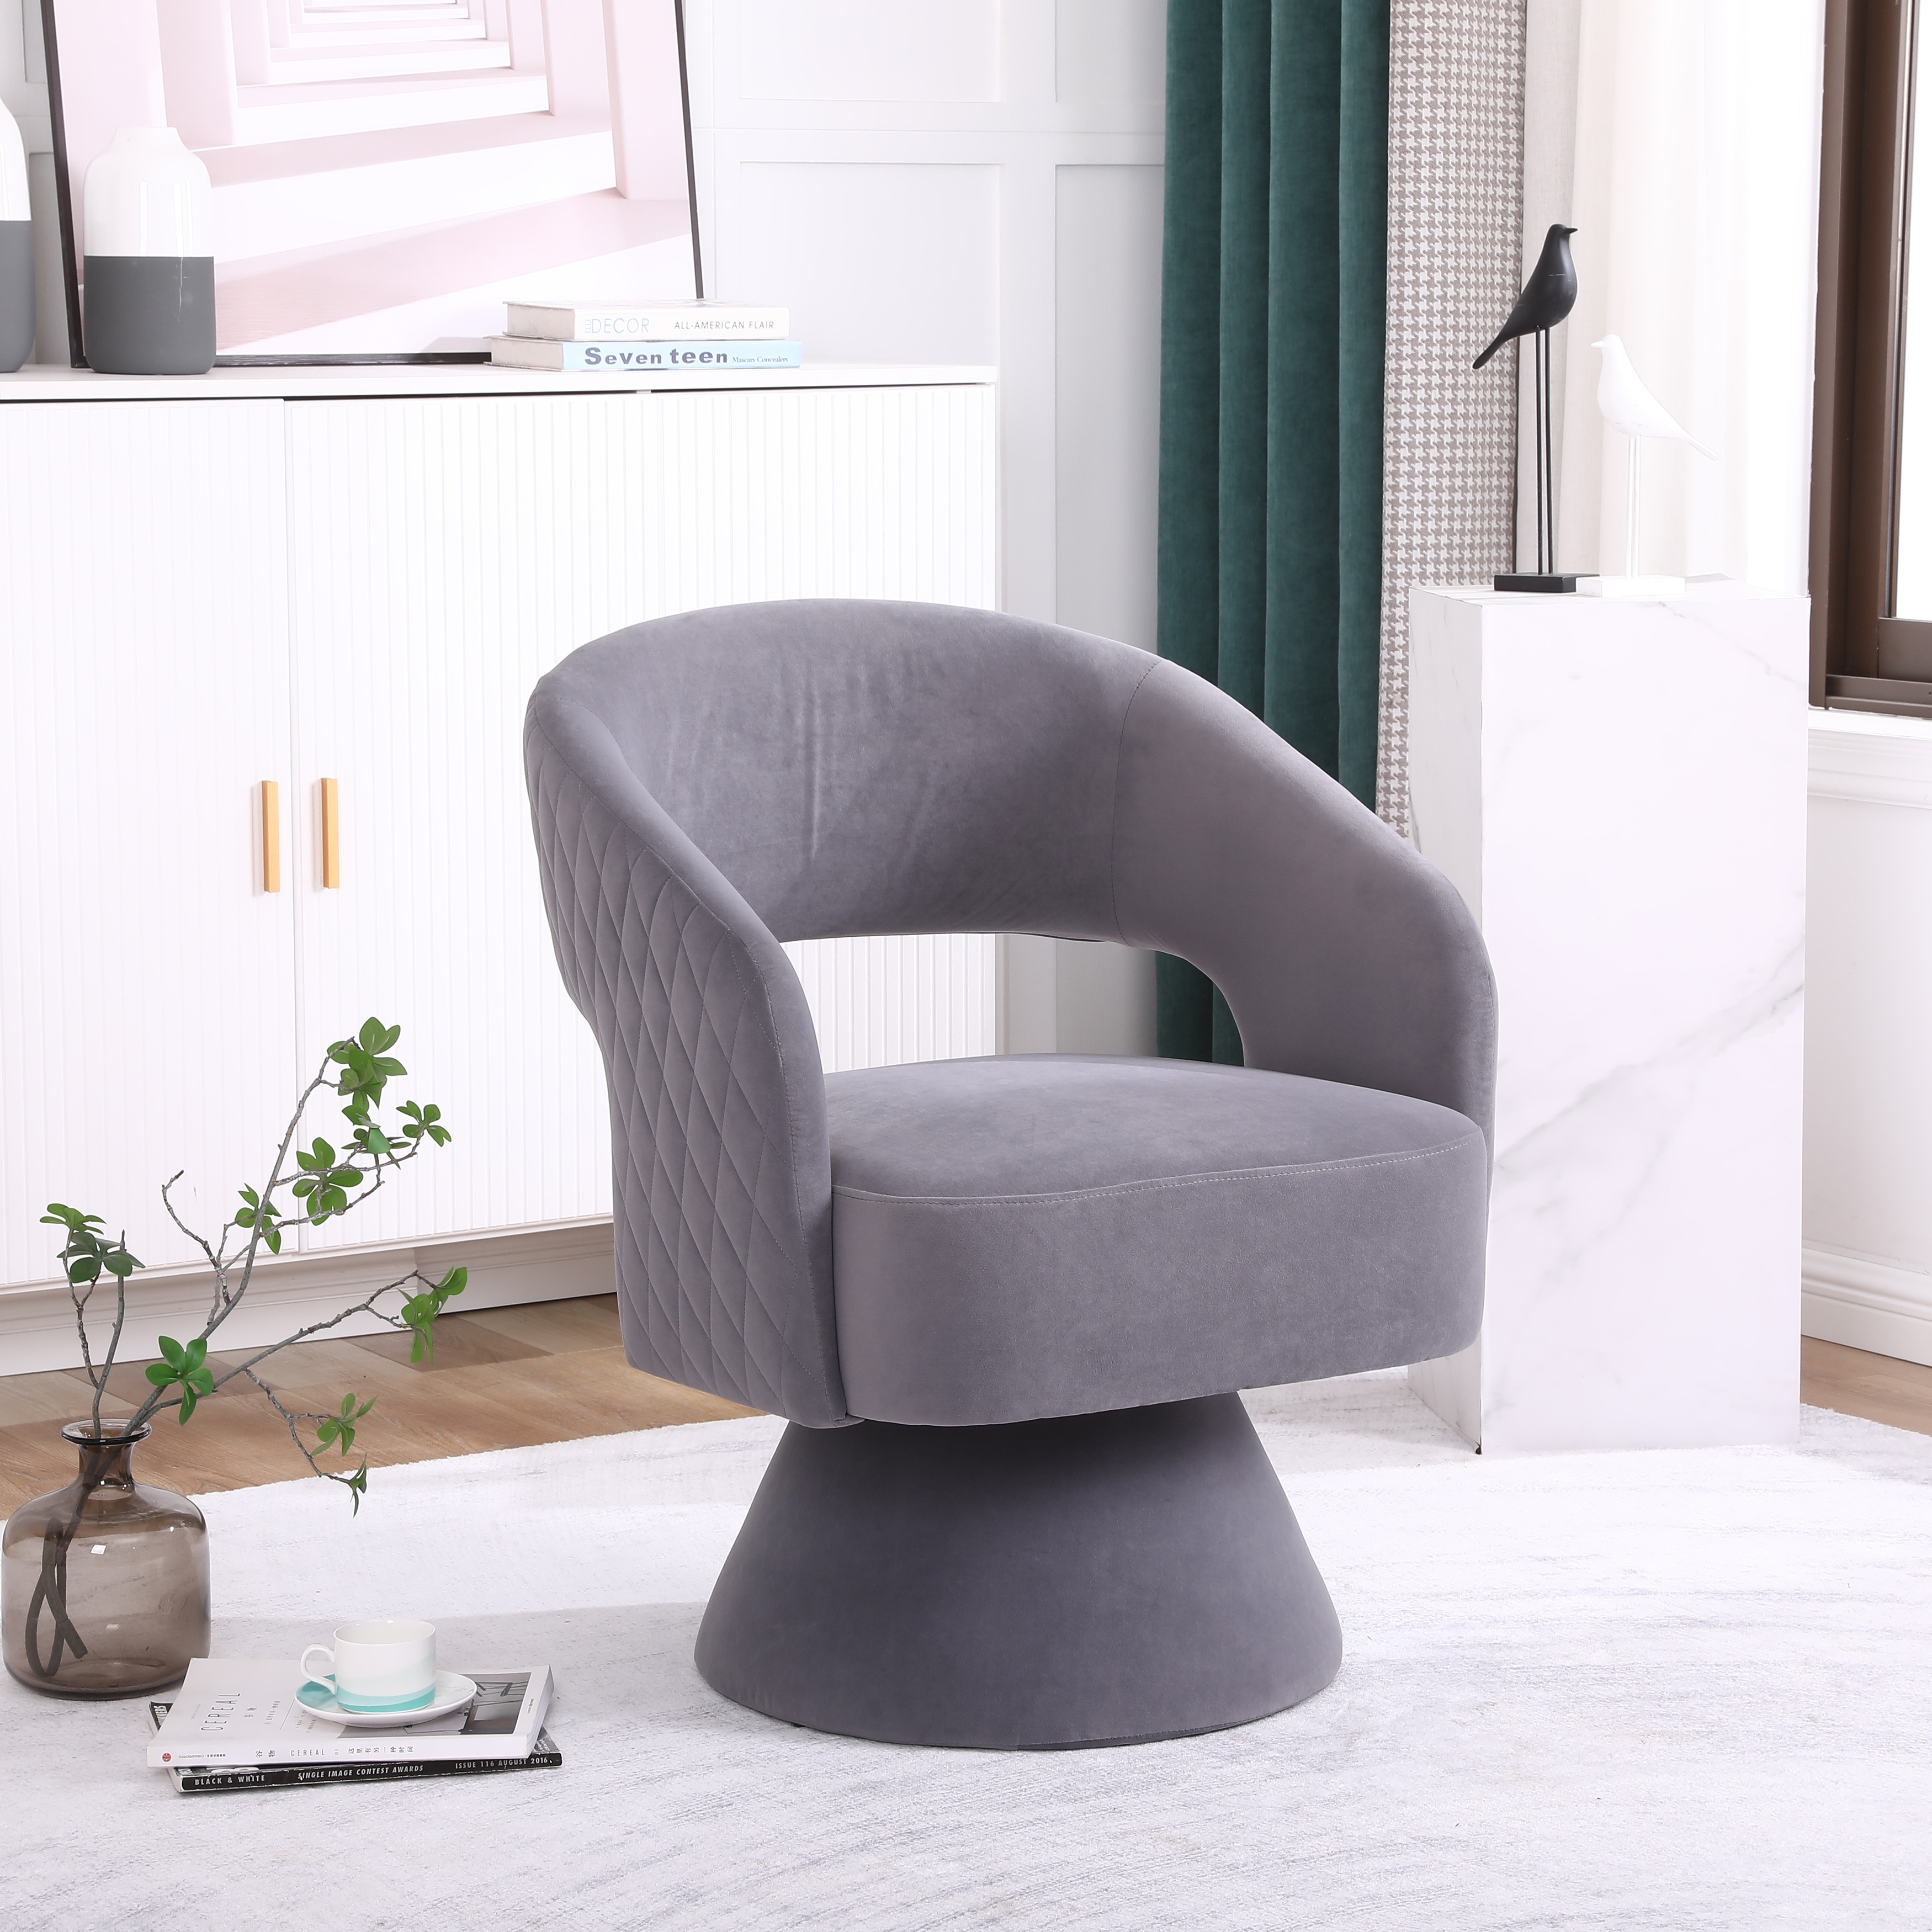 https://ak1.ostkcdn.com/images/products/is/images/direct/052f2cd35b158d1b38a46c1edb97fef9b963820f/Swivel-Accent-Chair-Modern-Arm-Chair%2C-Round-Barrel-Chair-in-Fabric%2C-Single-Reading-Chair%2C-Suitable-for-Living-Room-Bedroom.jpg